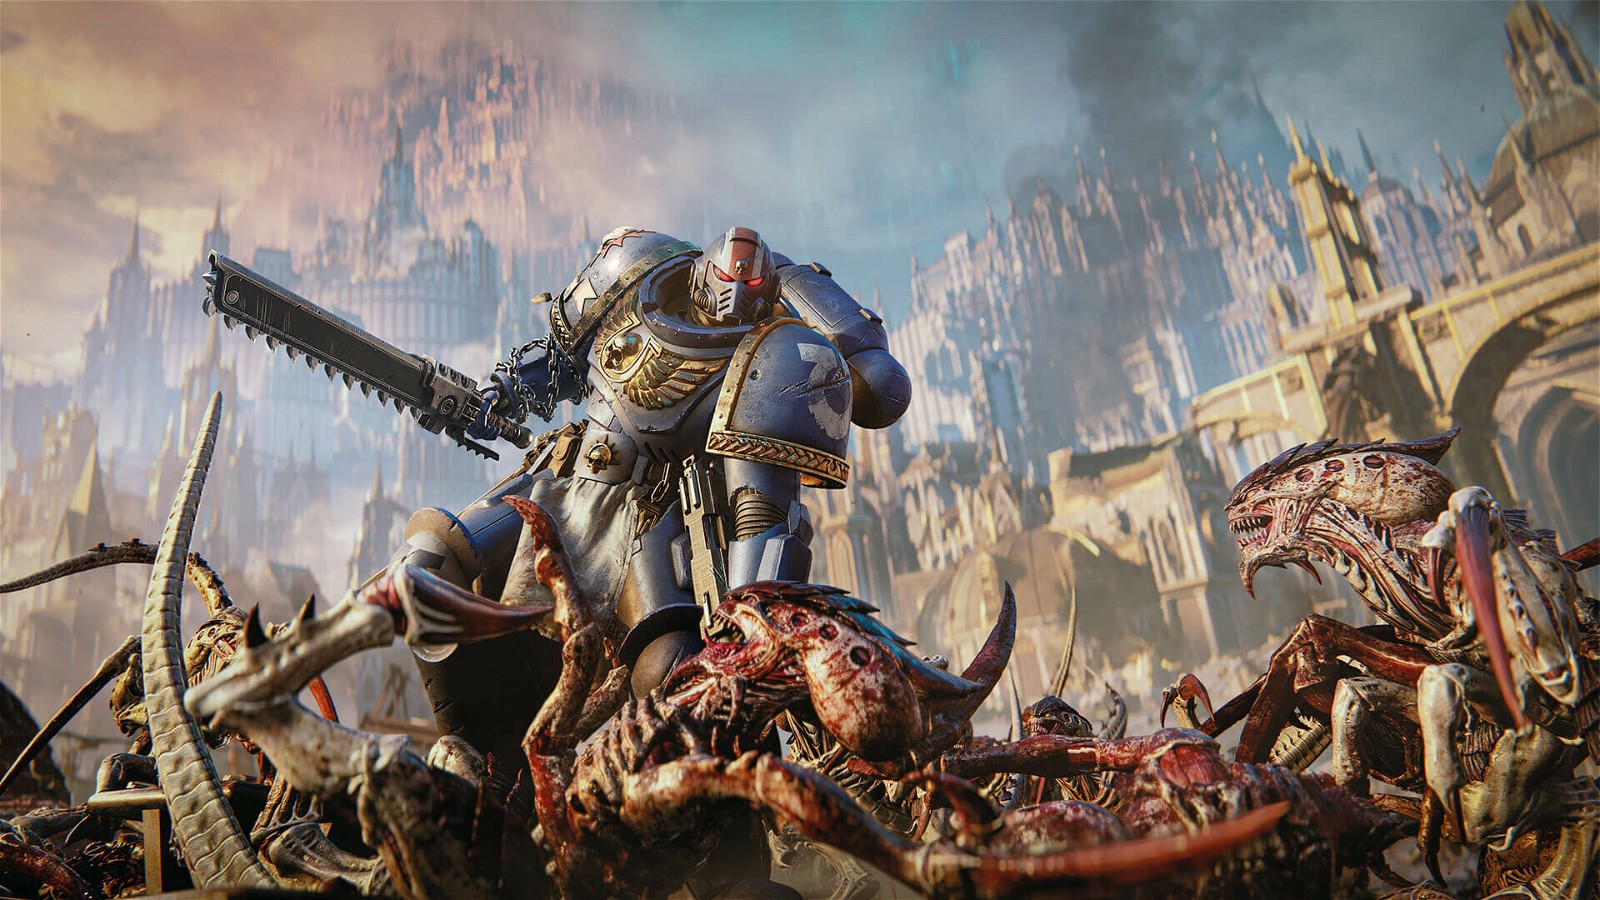 Warhammer 40K: Space Marine 2 has been steadily building as the release is coming near.